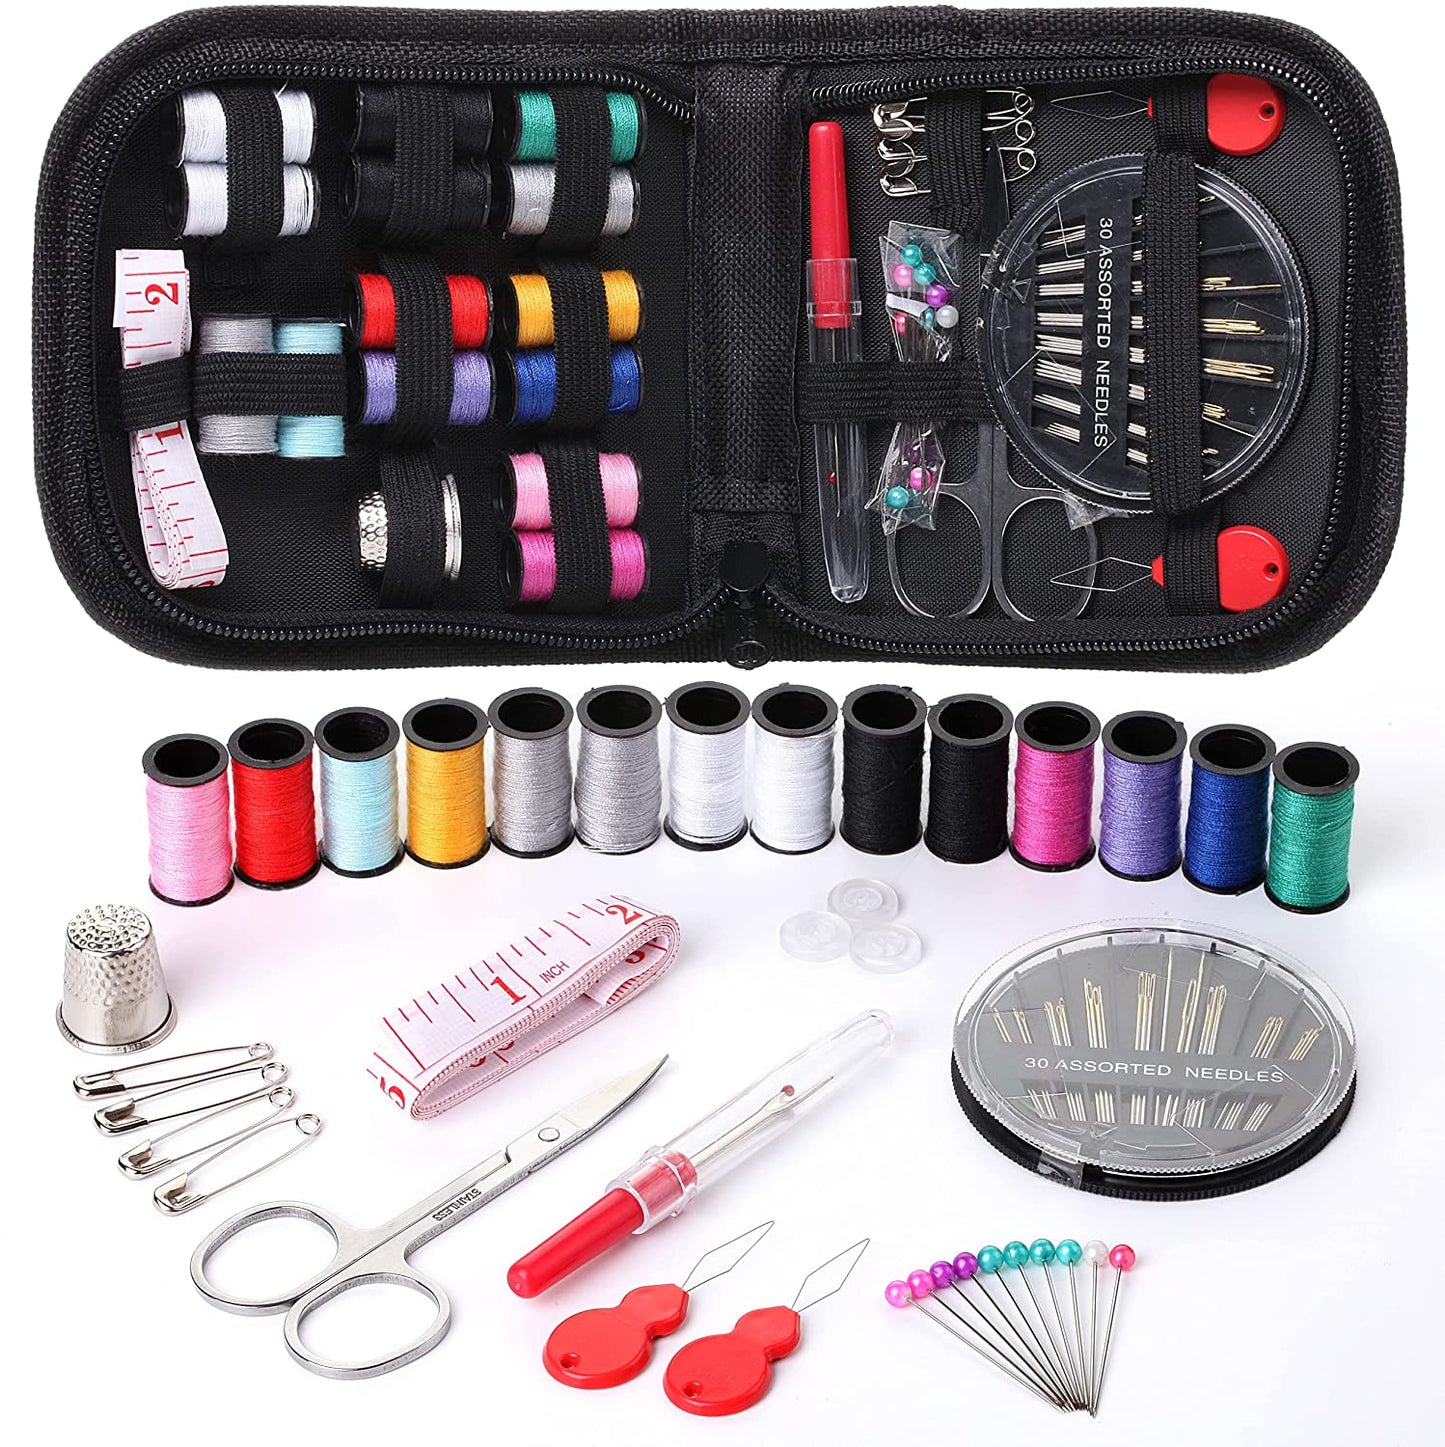 Mr. Pen- Sewing Kit, Sewing Kit for Adults, Travel Sewing Kit, Needle and Thread Kit, Mini Sewing Kit, Sewing Kit for Beginners